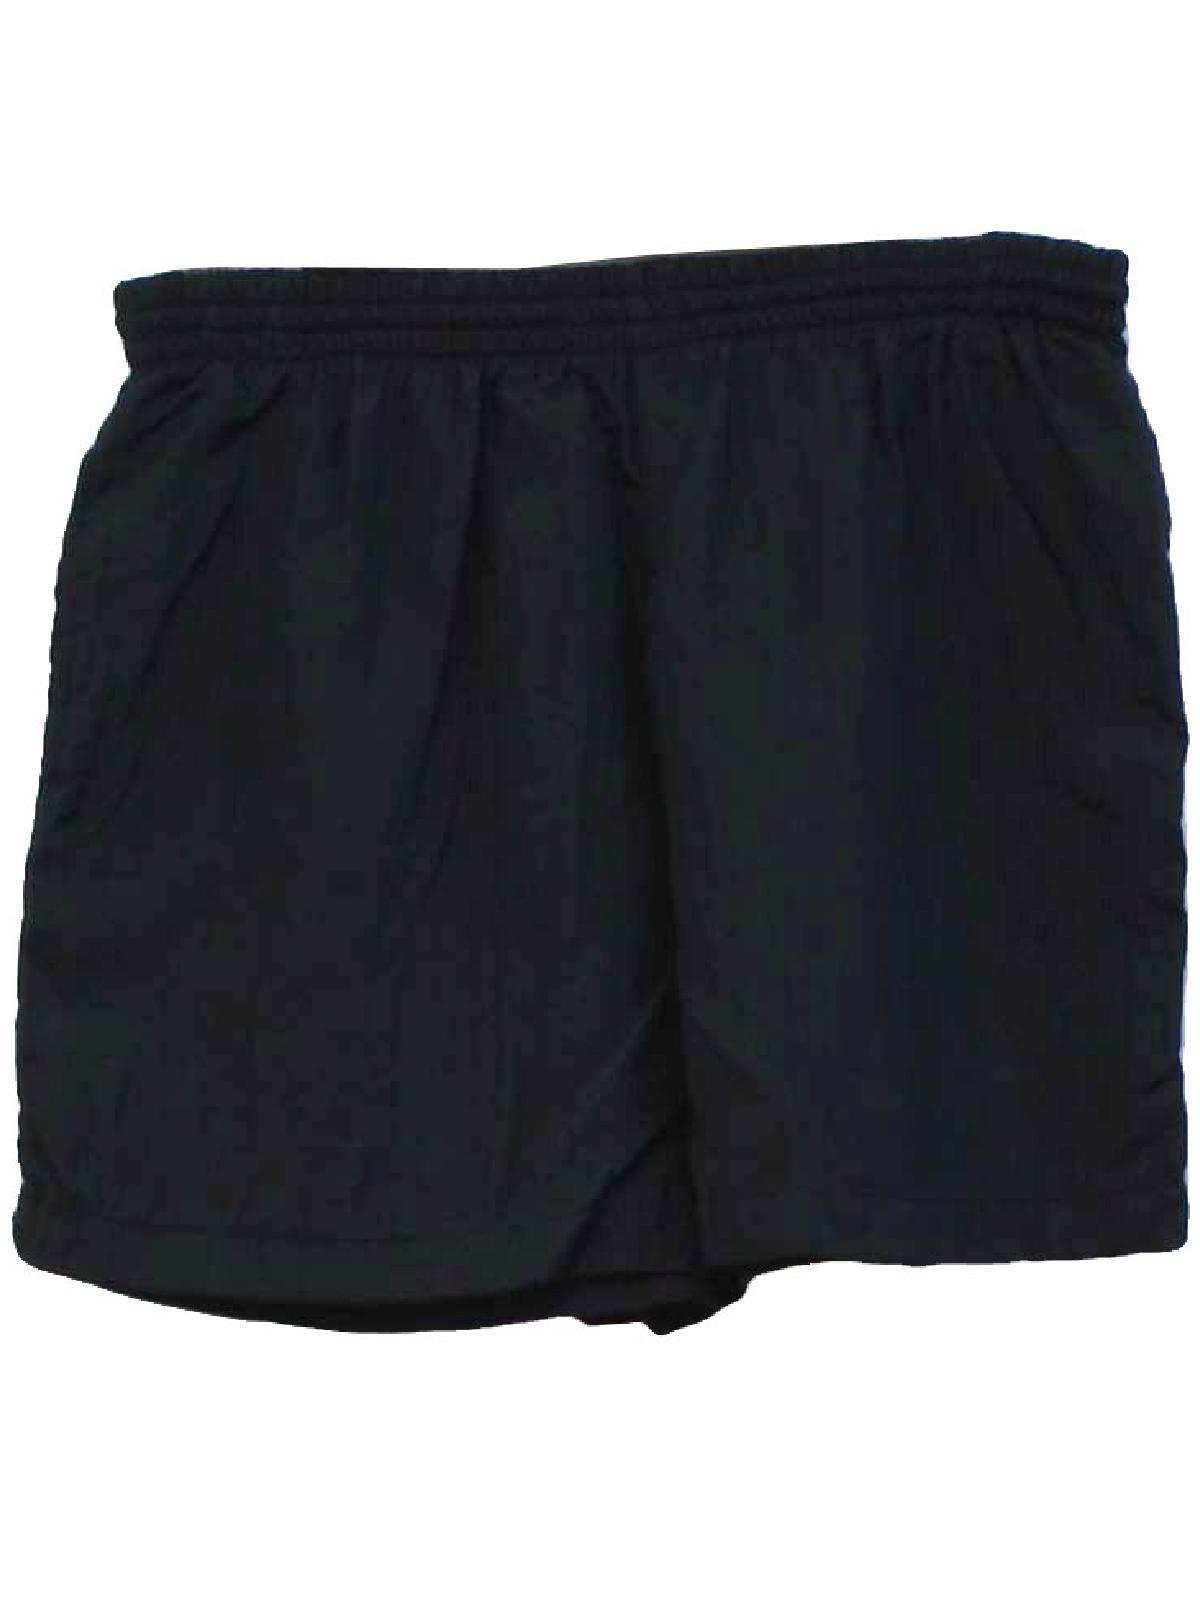 1990's Vintage The Body Co Shorts: 90s -The Body Co- Mens black ...